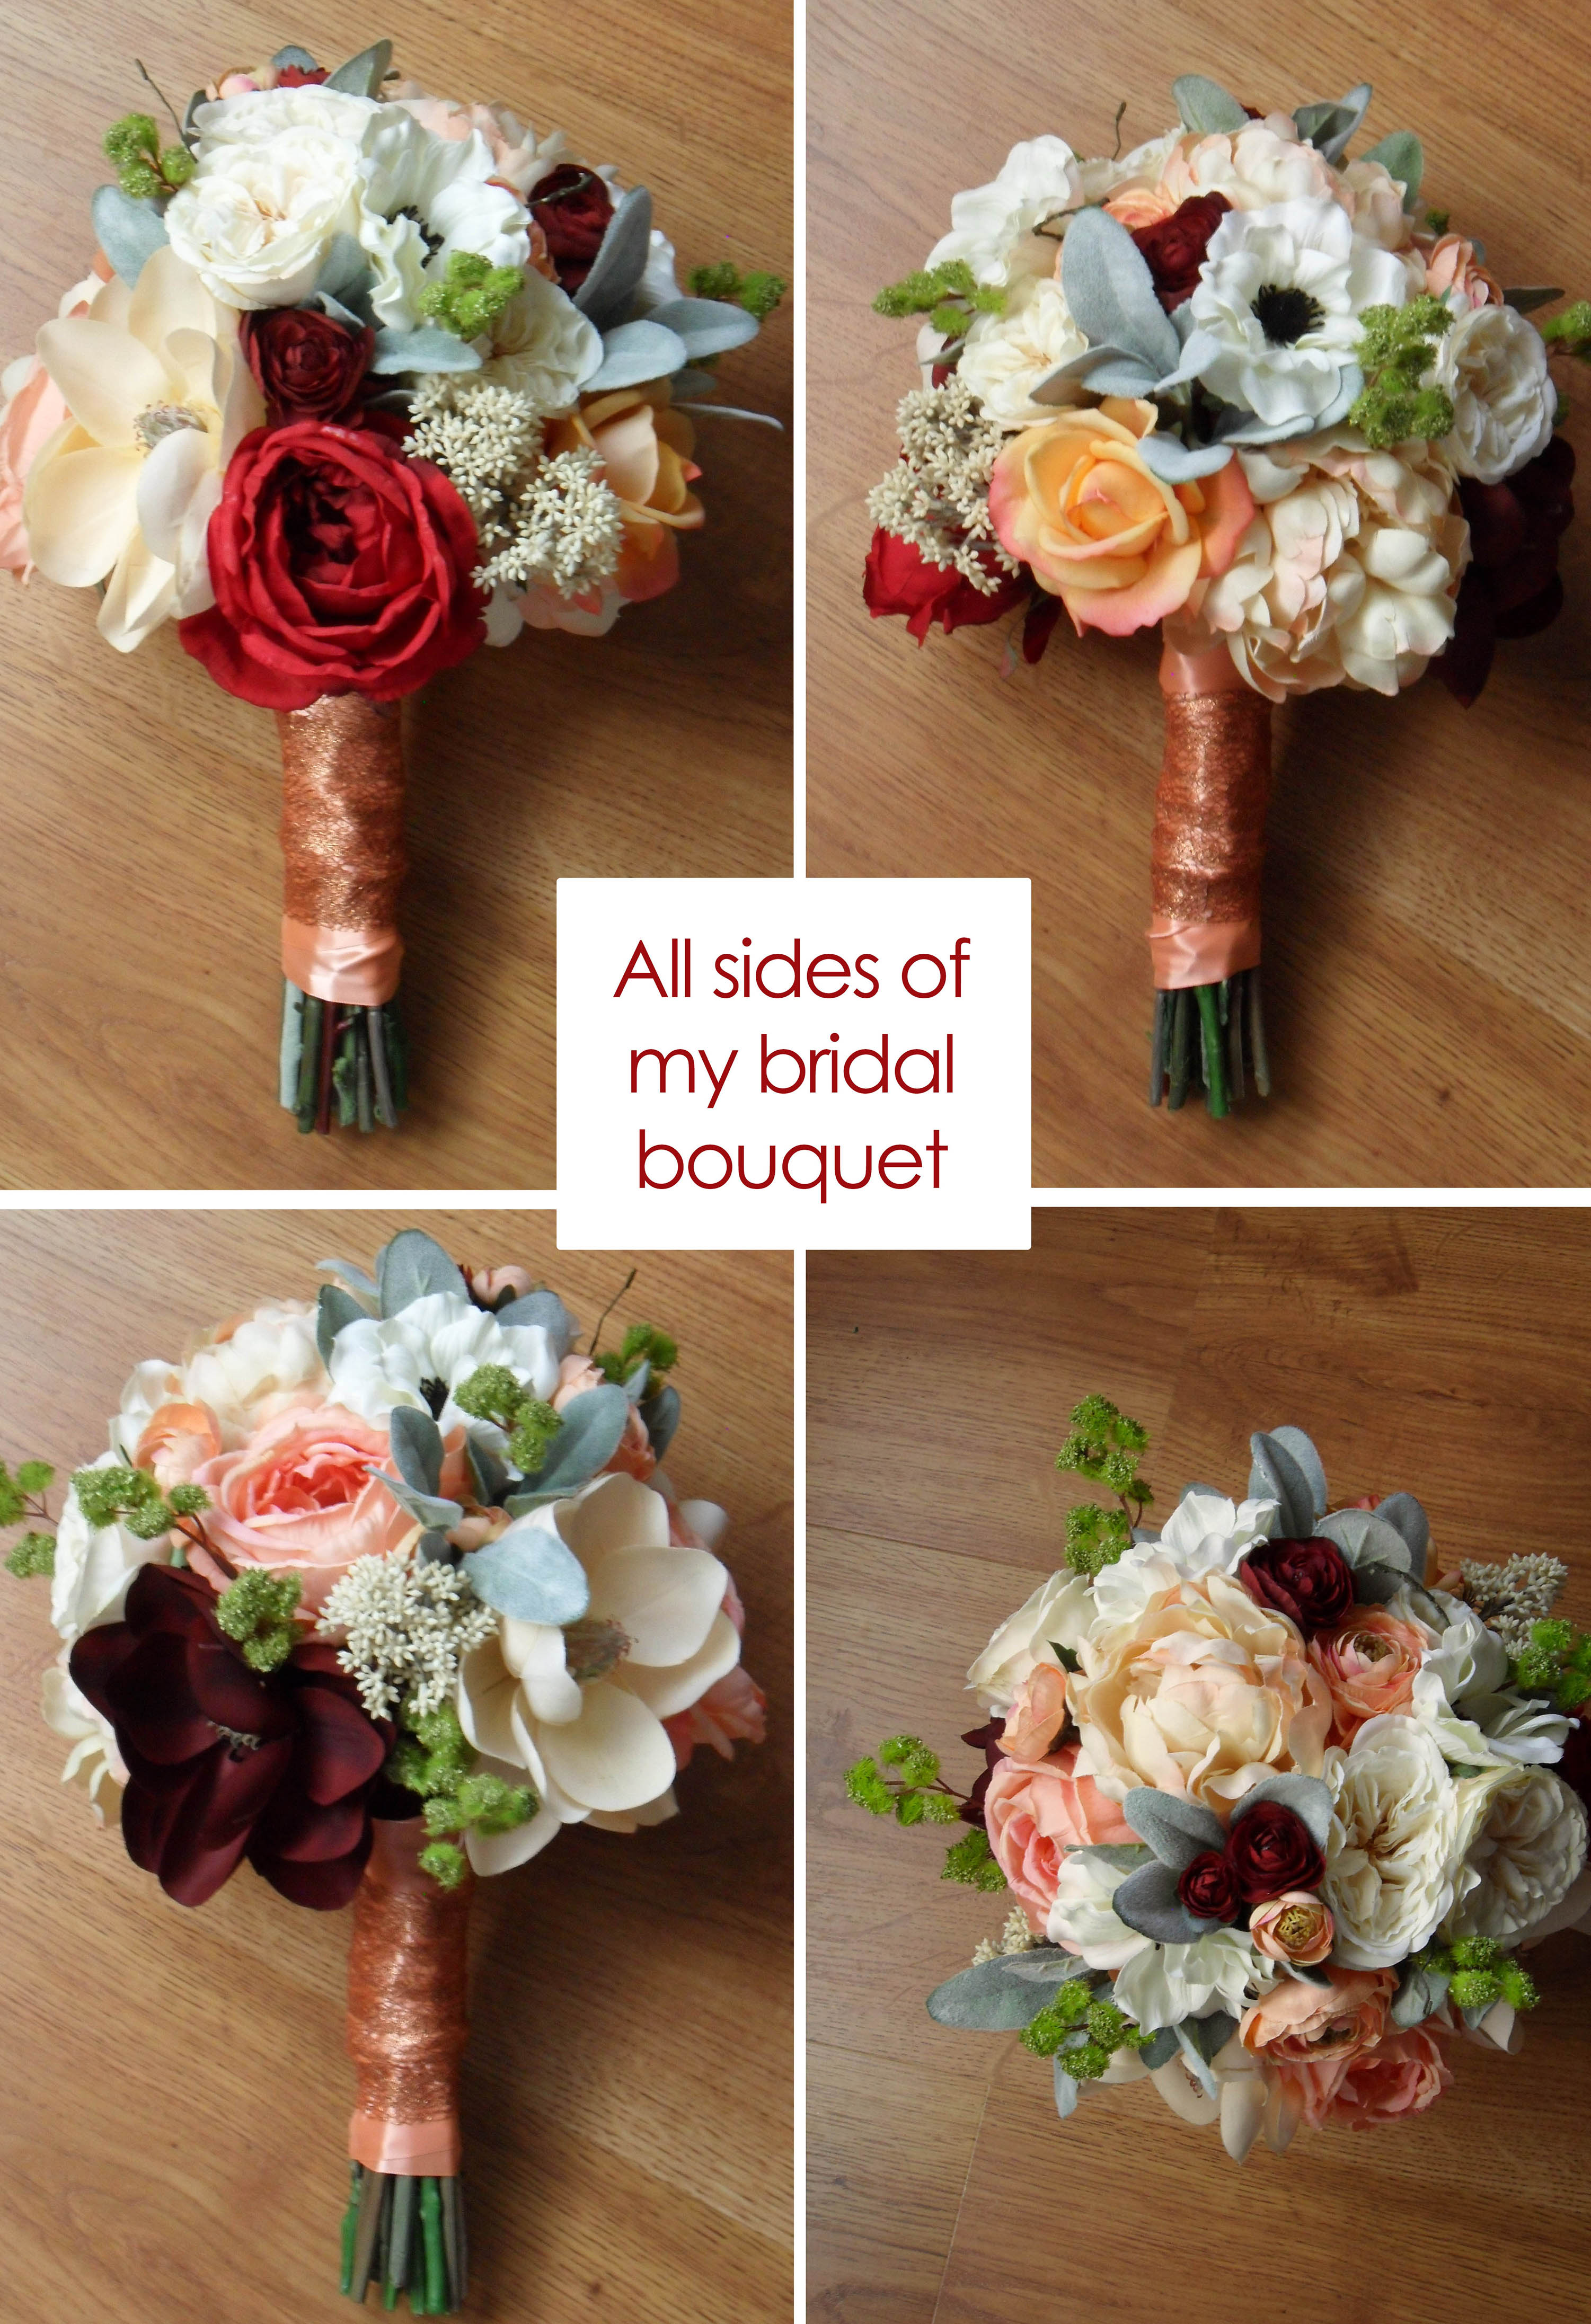 How To Make Your Own Bouquet For The